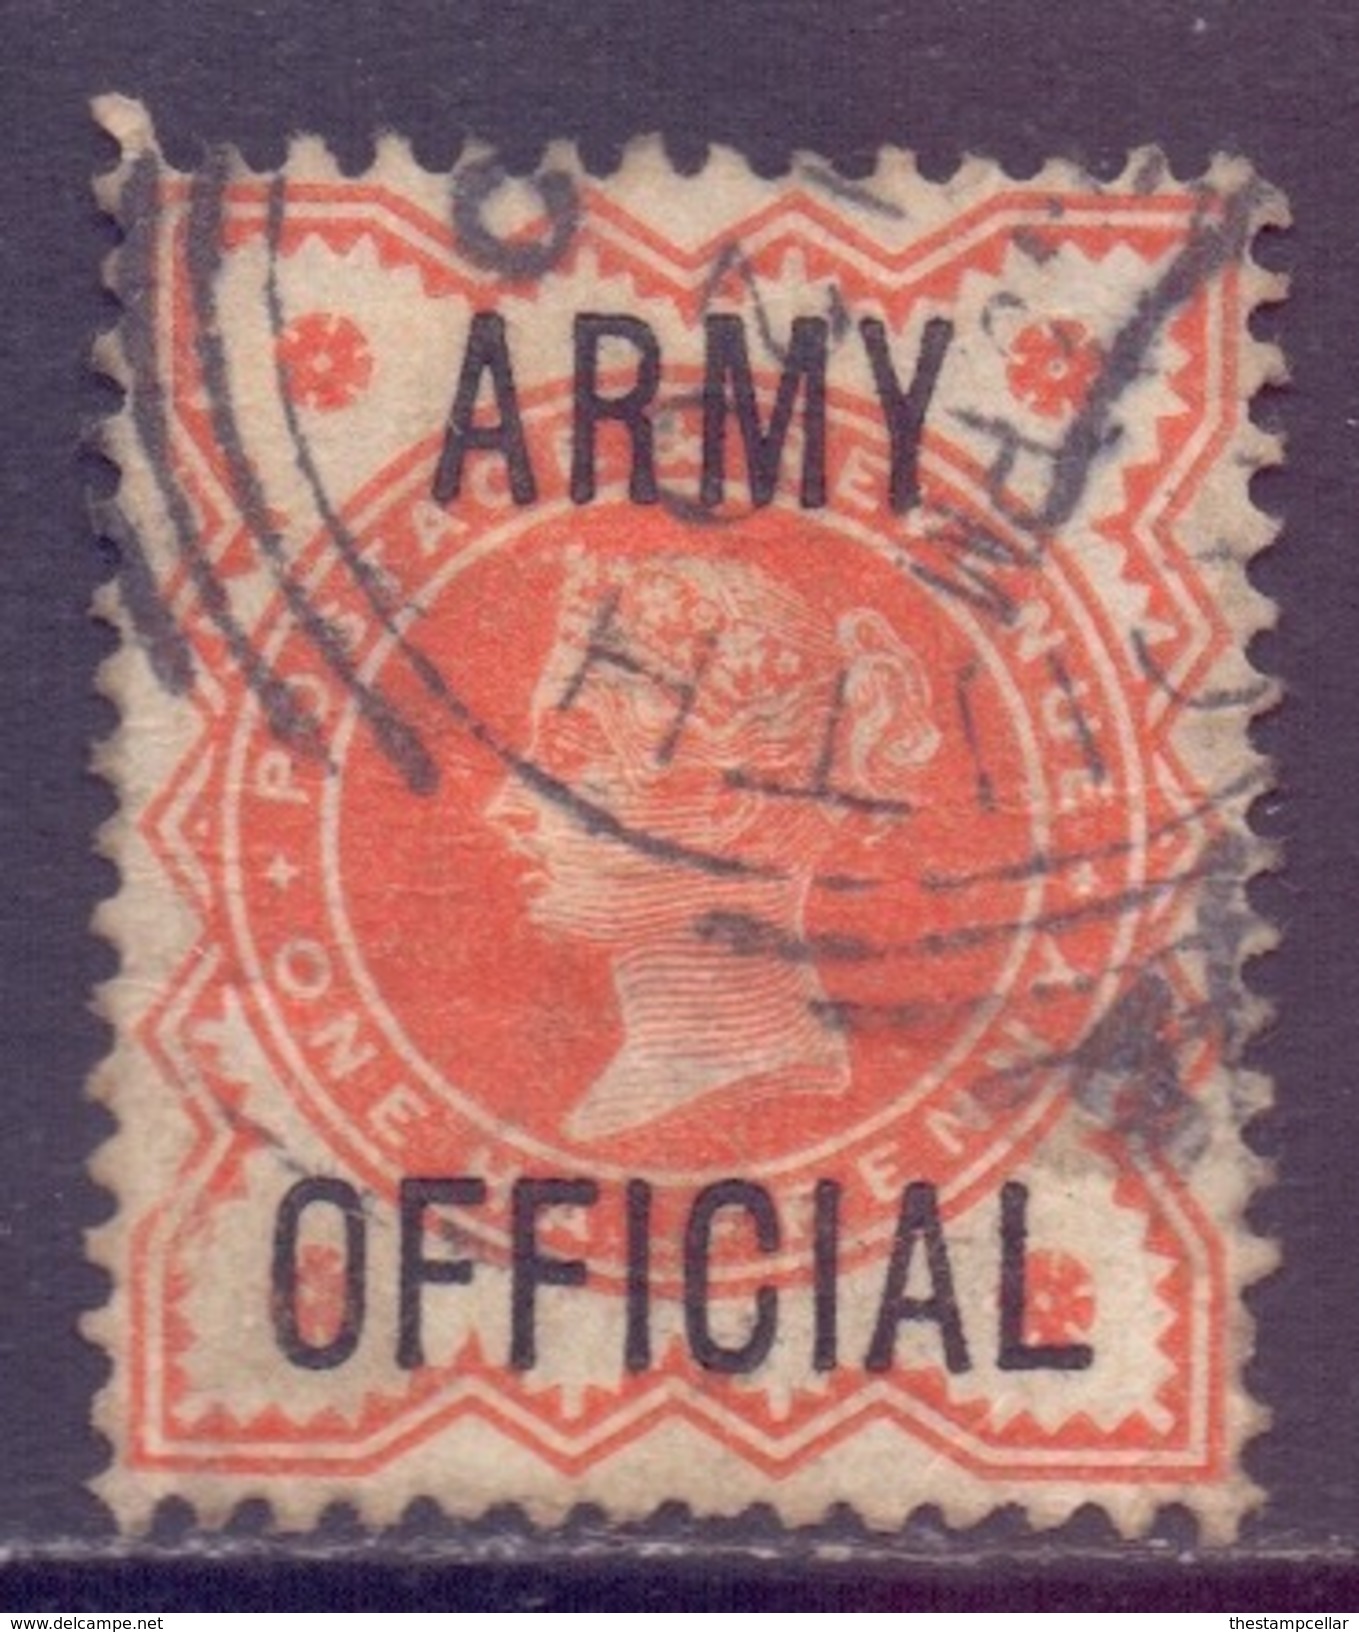 GB Scott O54 - SG O41, 1896 Army Official 1/2d Used - Service